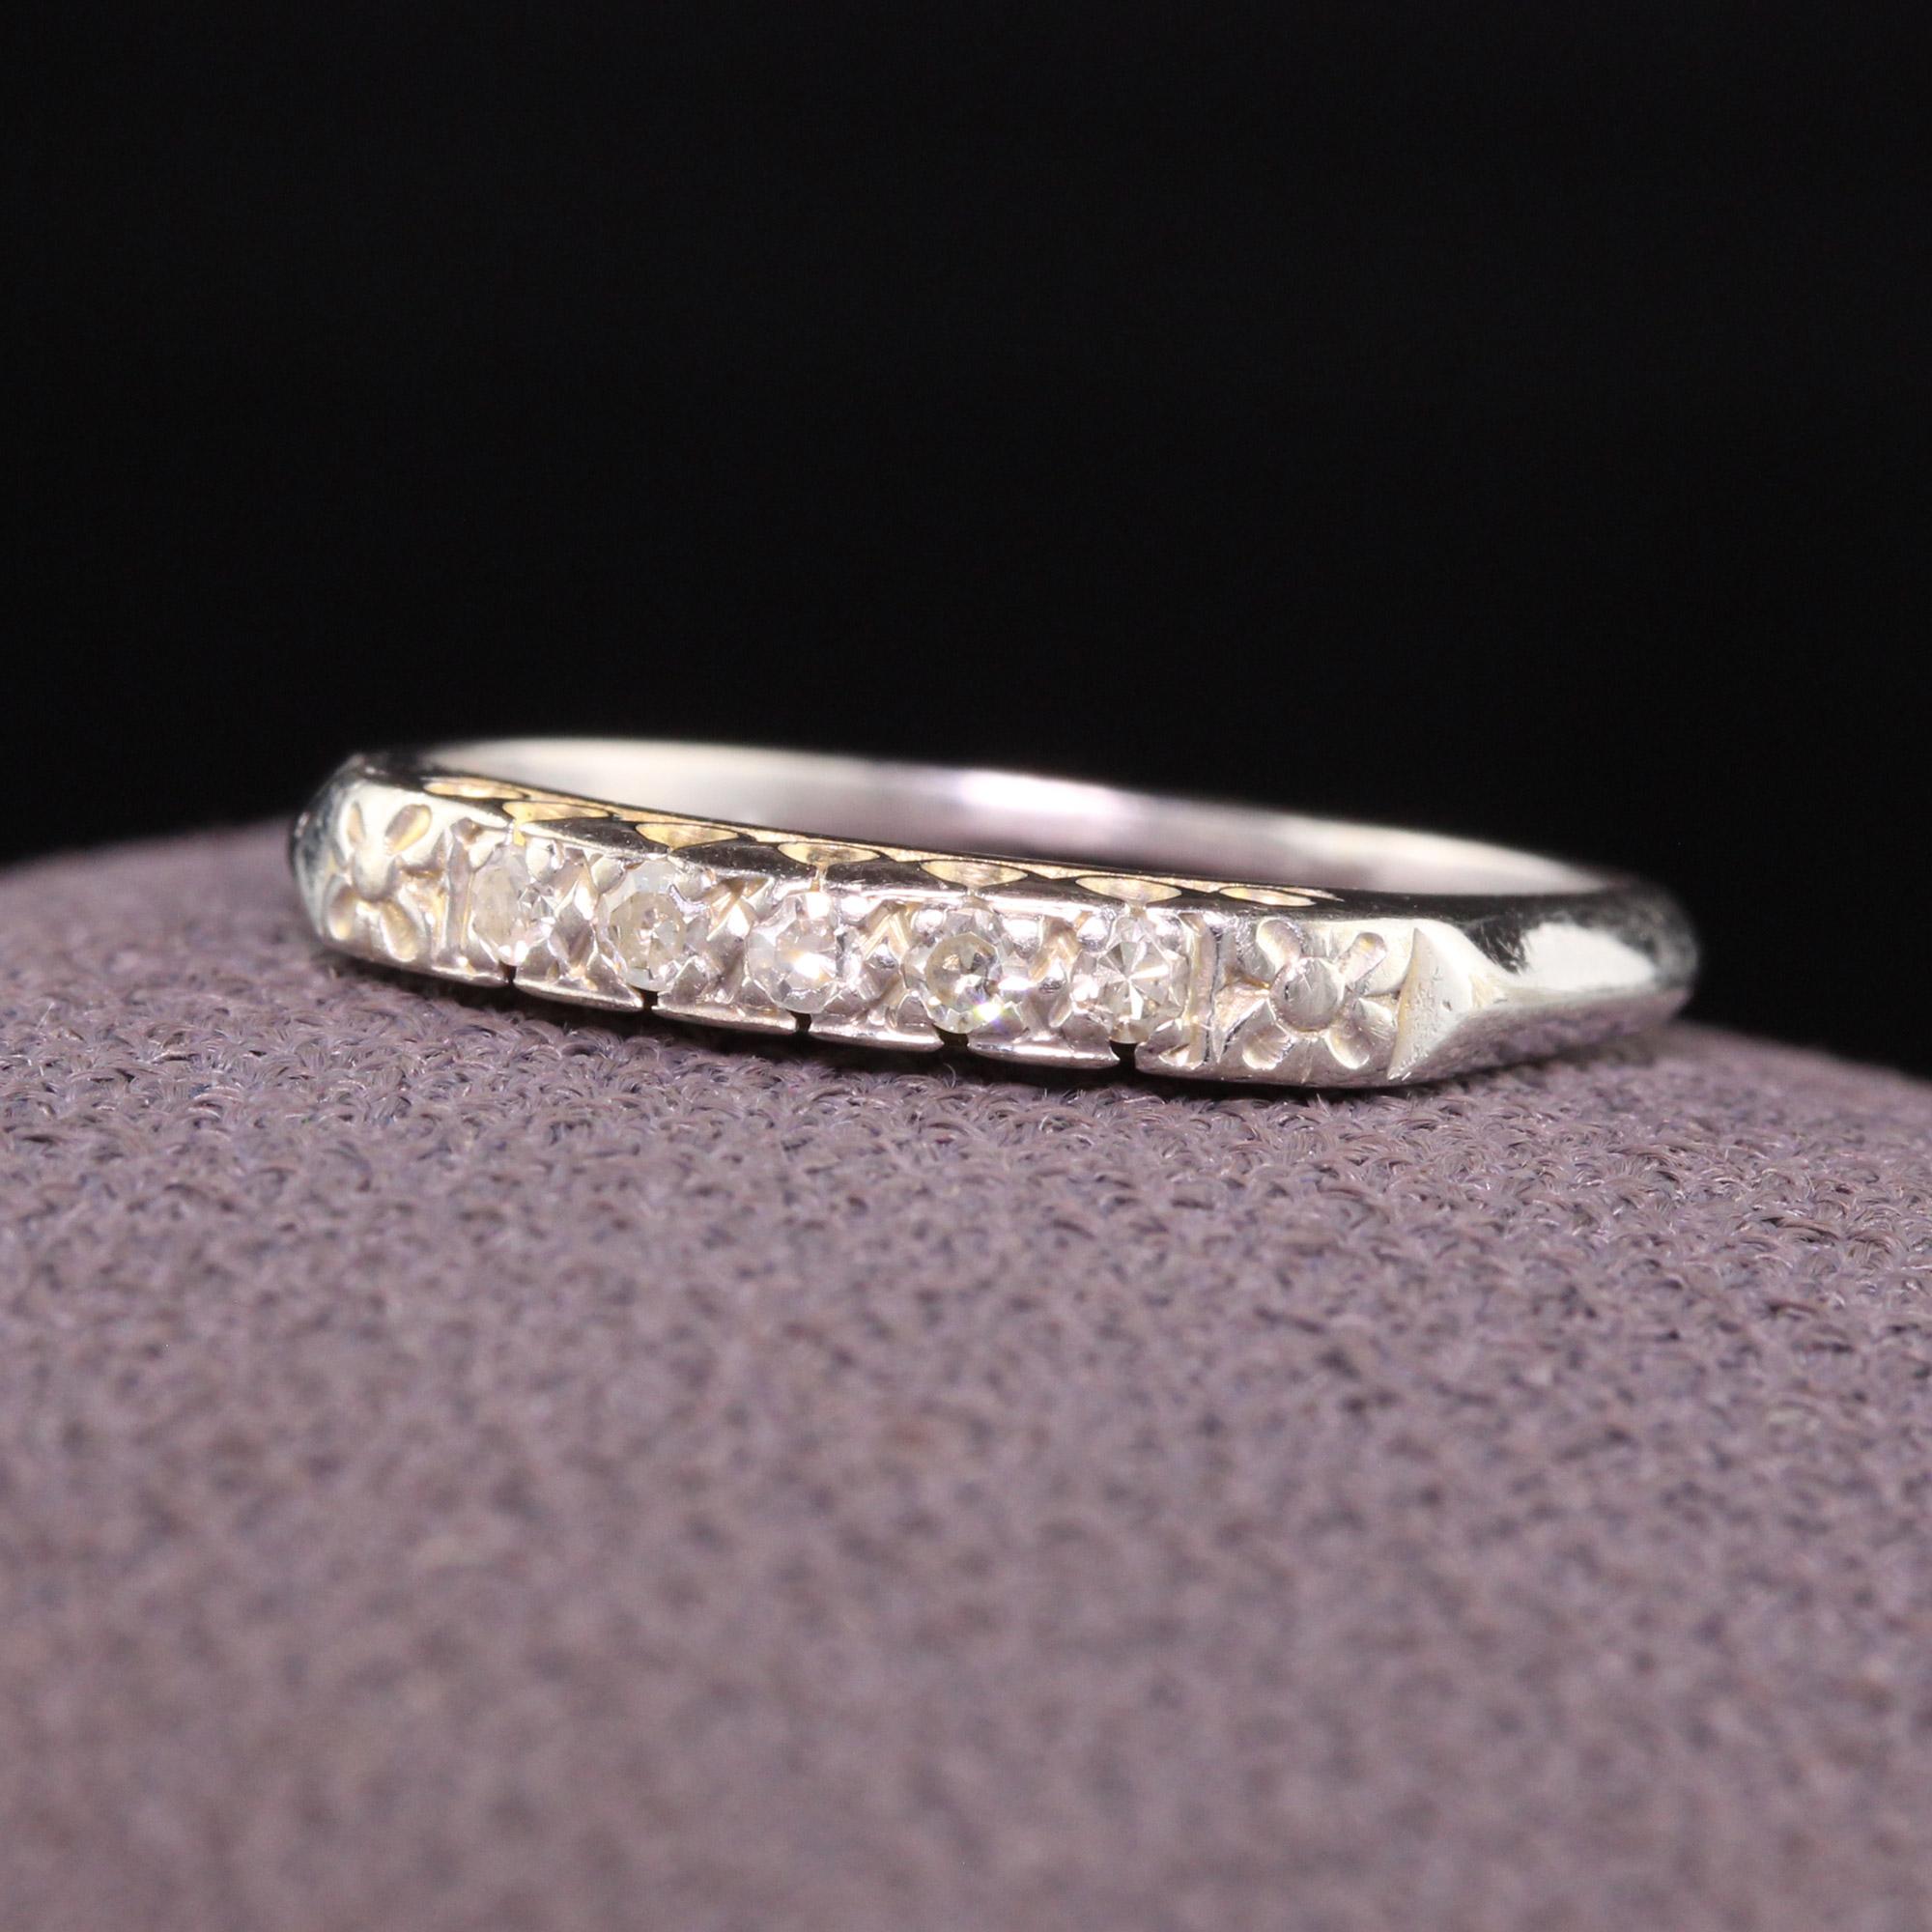 Beautiful Antique Art Deco 14K White Gold Single Cut Diamond Wedding Band. This classic wedding band is crafted in 14K white gold and has single cut diamonds on the top of the ring with floral engravings on each side.

Item #R1188

Metal: 14K White